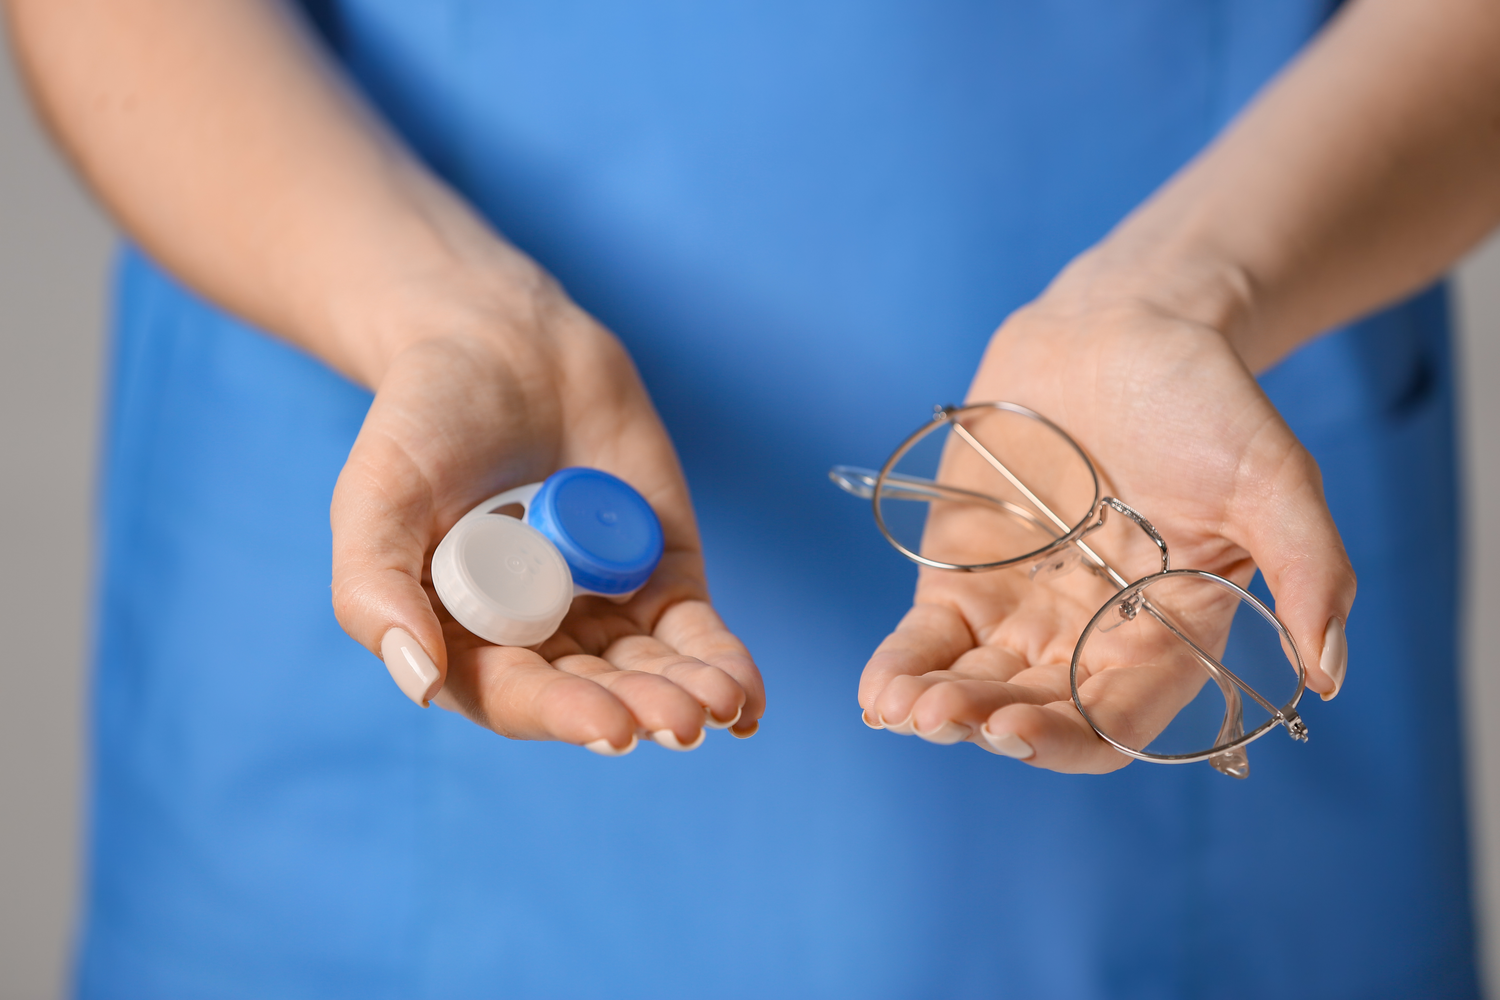 Contact Lenses: The Pros and Cons of Wearing Them